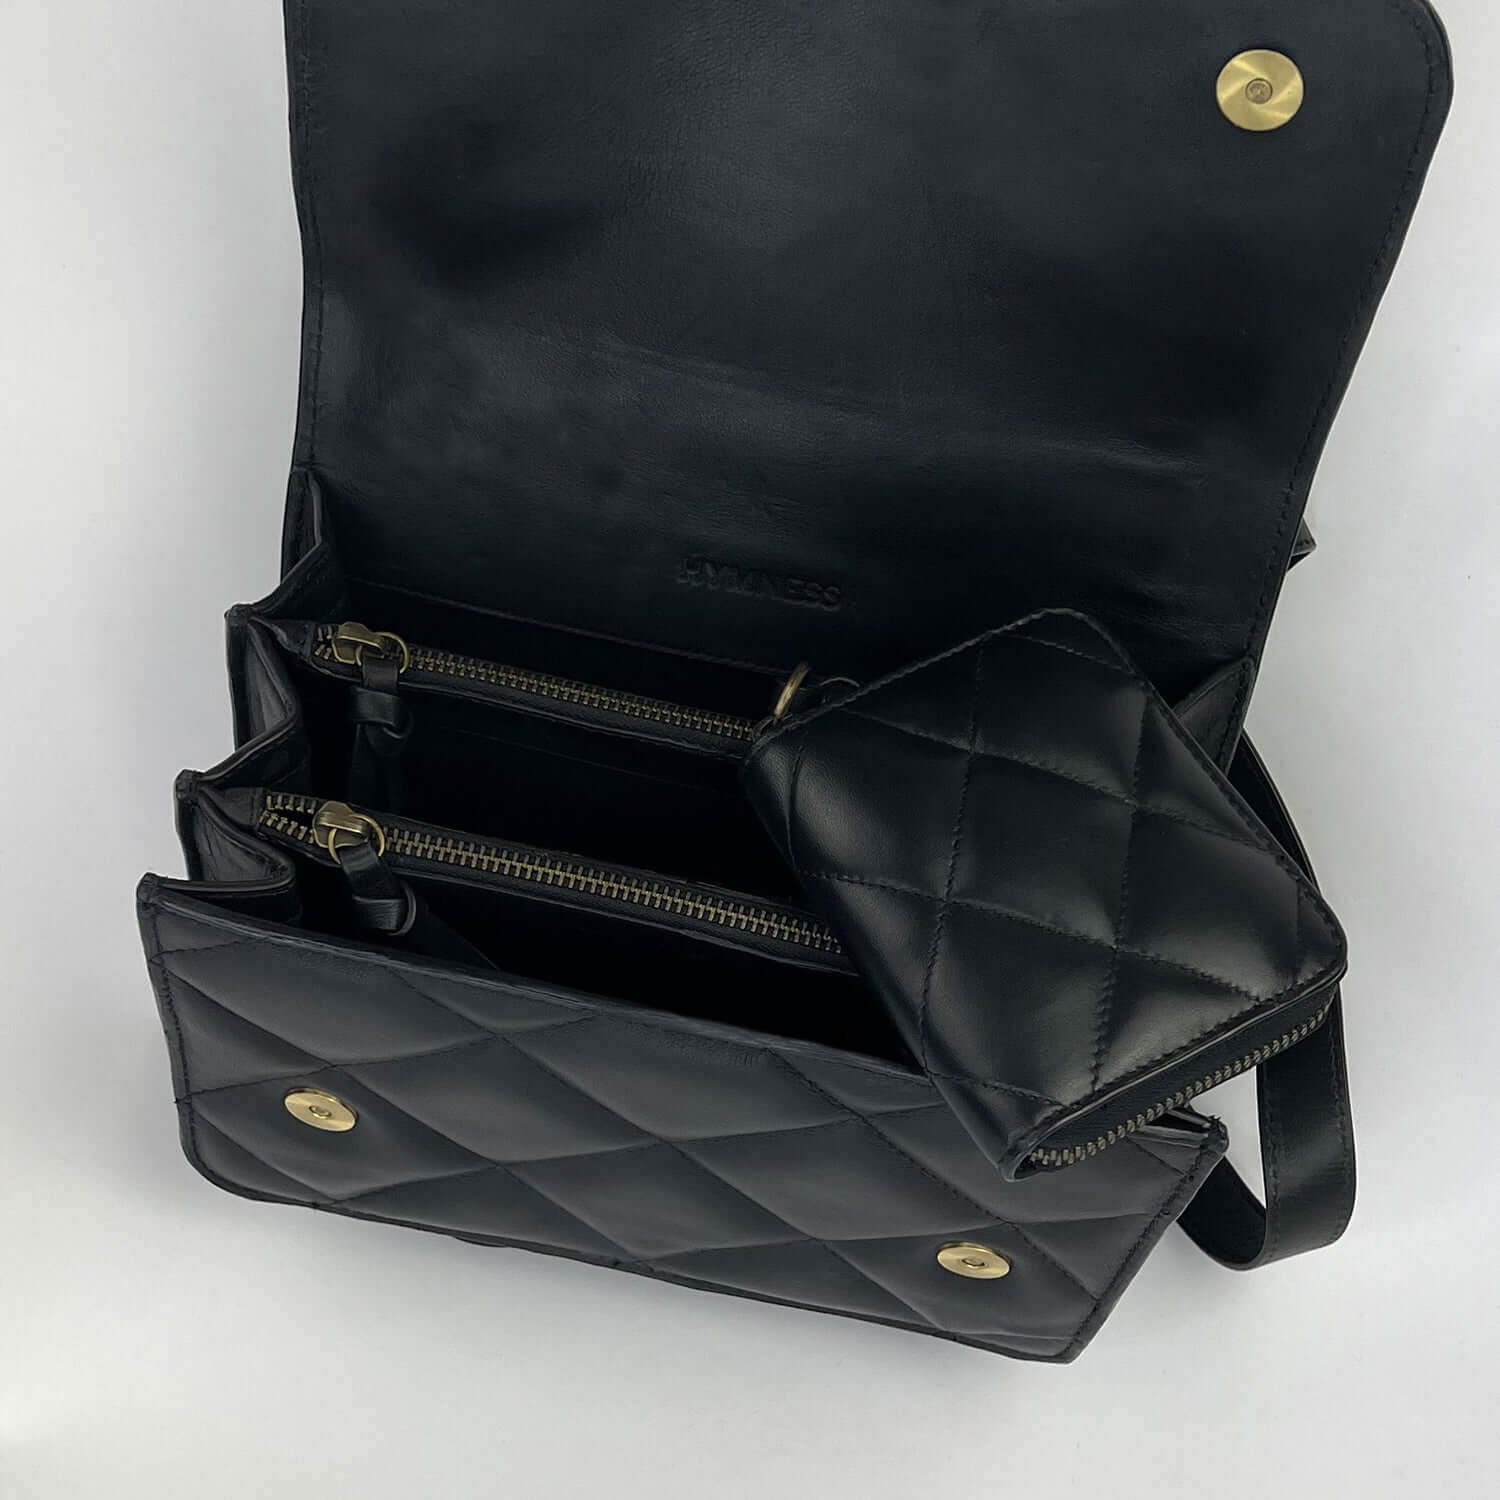 Black compartment bag with open flap, showing the inside of the bag with three open compartments and two zipped pockets.